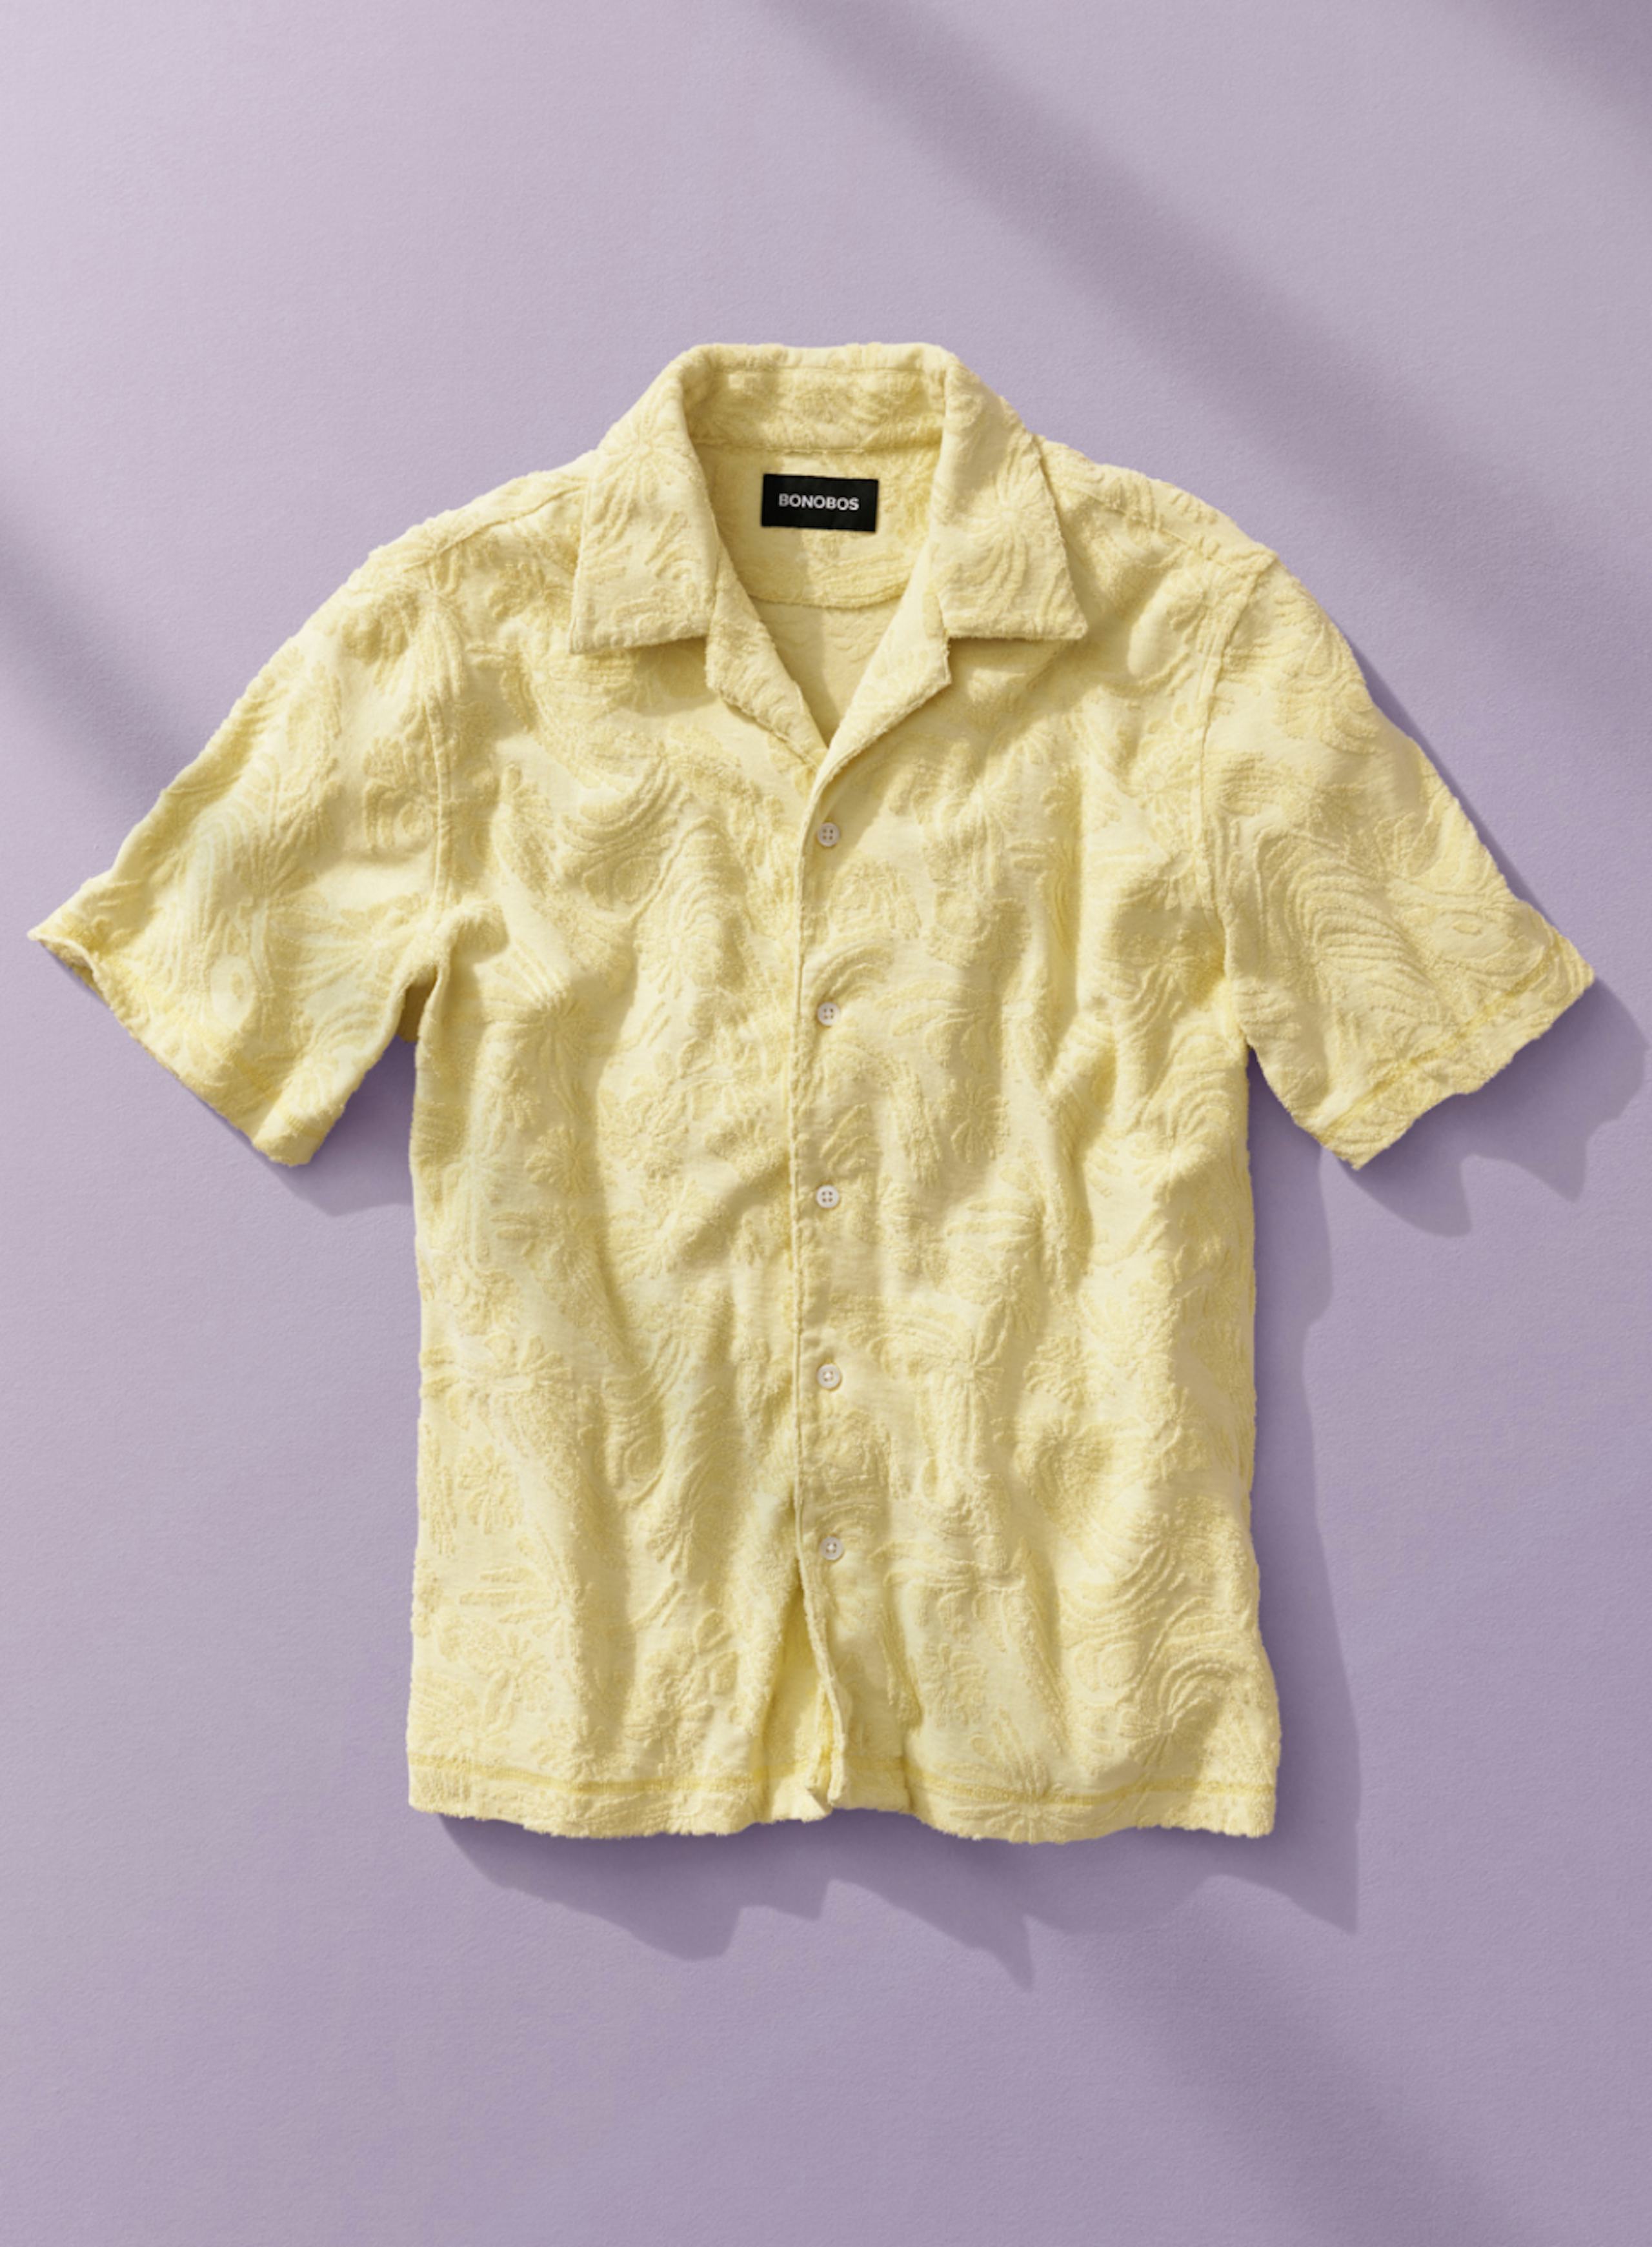 Riviera Cabana Terry Shirt in Lemon Lime Trippy Floral on purple background